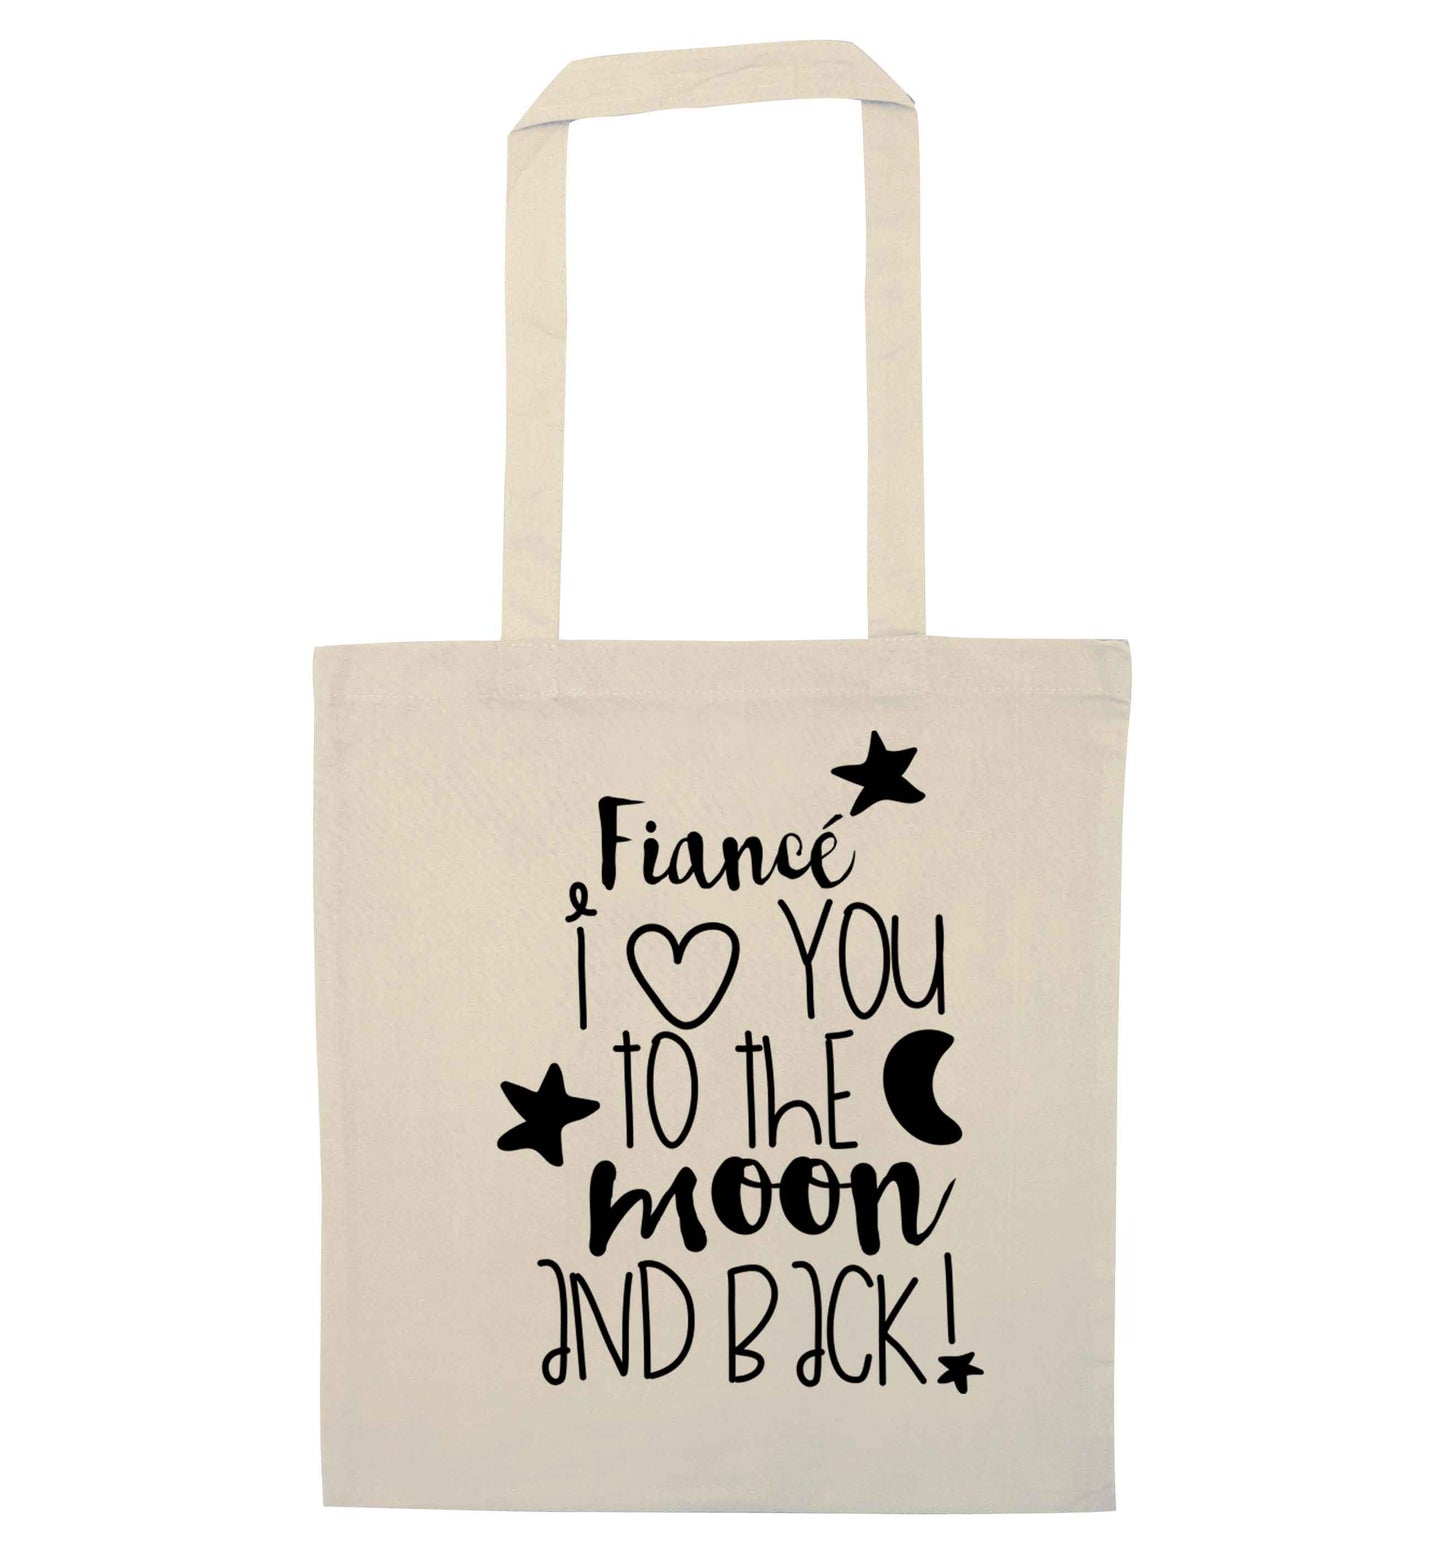 Fiancé I love you to the moon and back natural tote bag